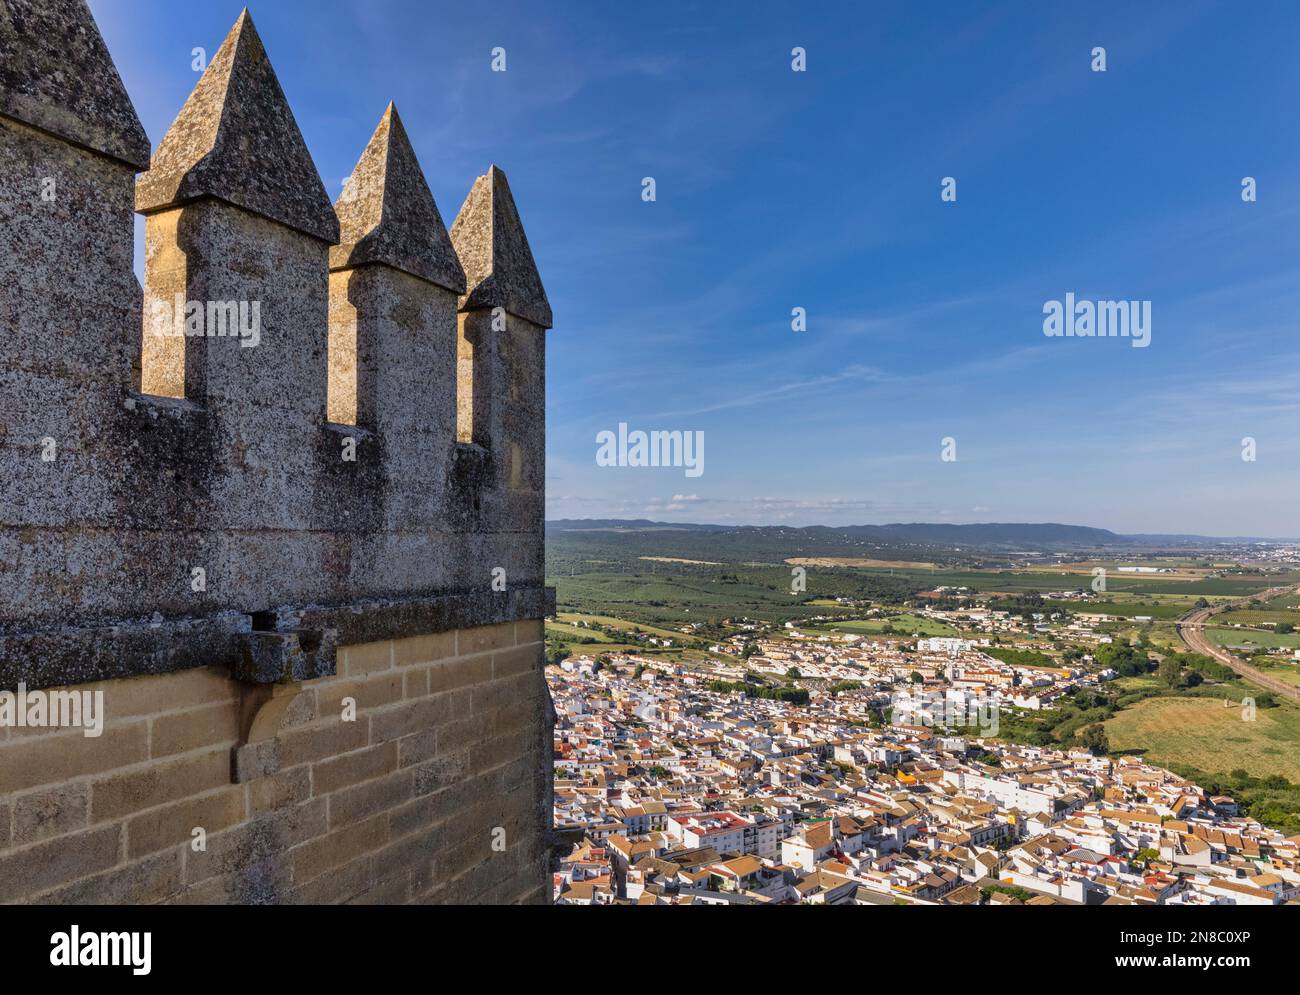 Almodovar del Rio, Cordoba Province, Andalusia, Spain.  Overall view from battlements of Almodovar castle.   Founded as a Roman fort the castle develo Stock Photo